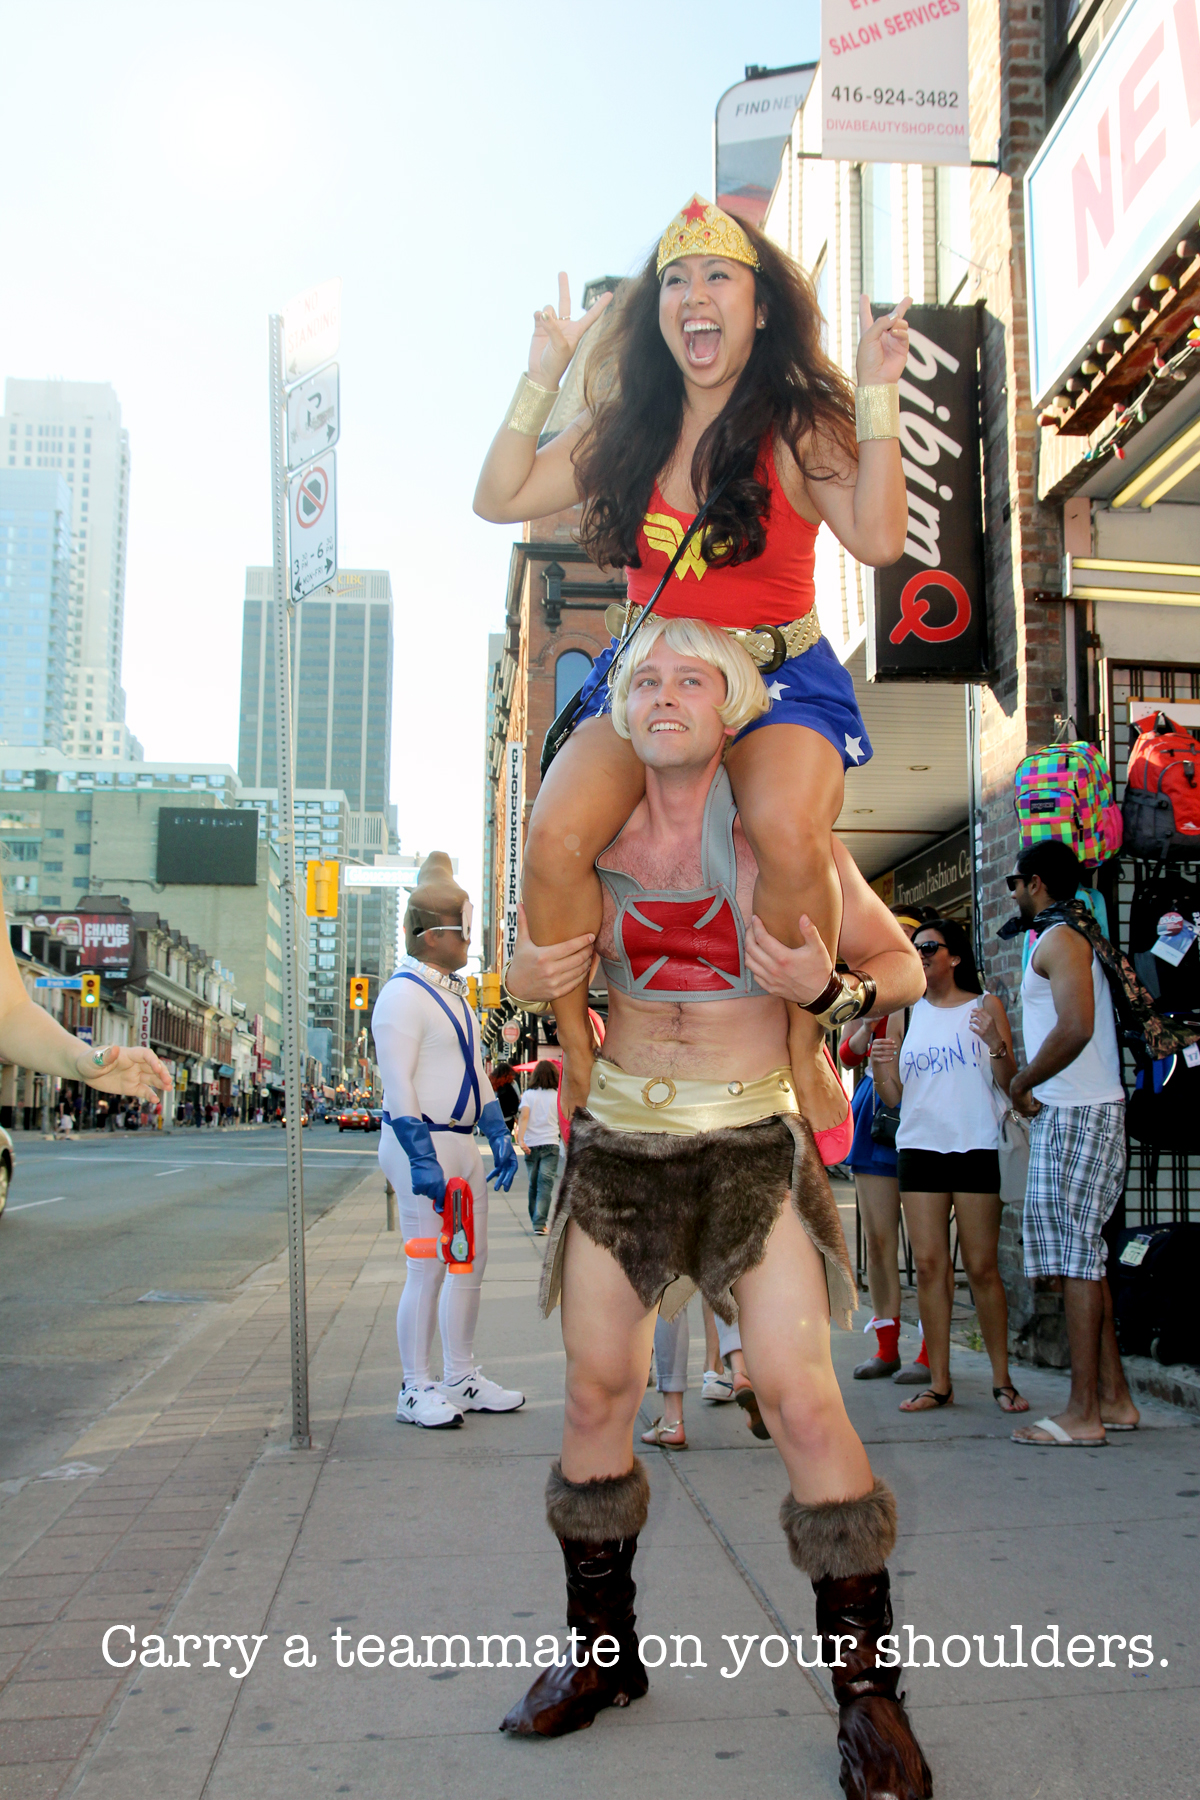 he man and wonder woman